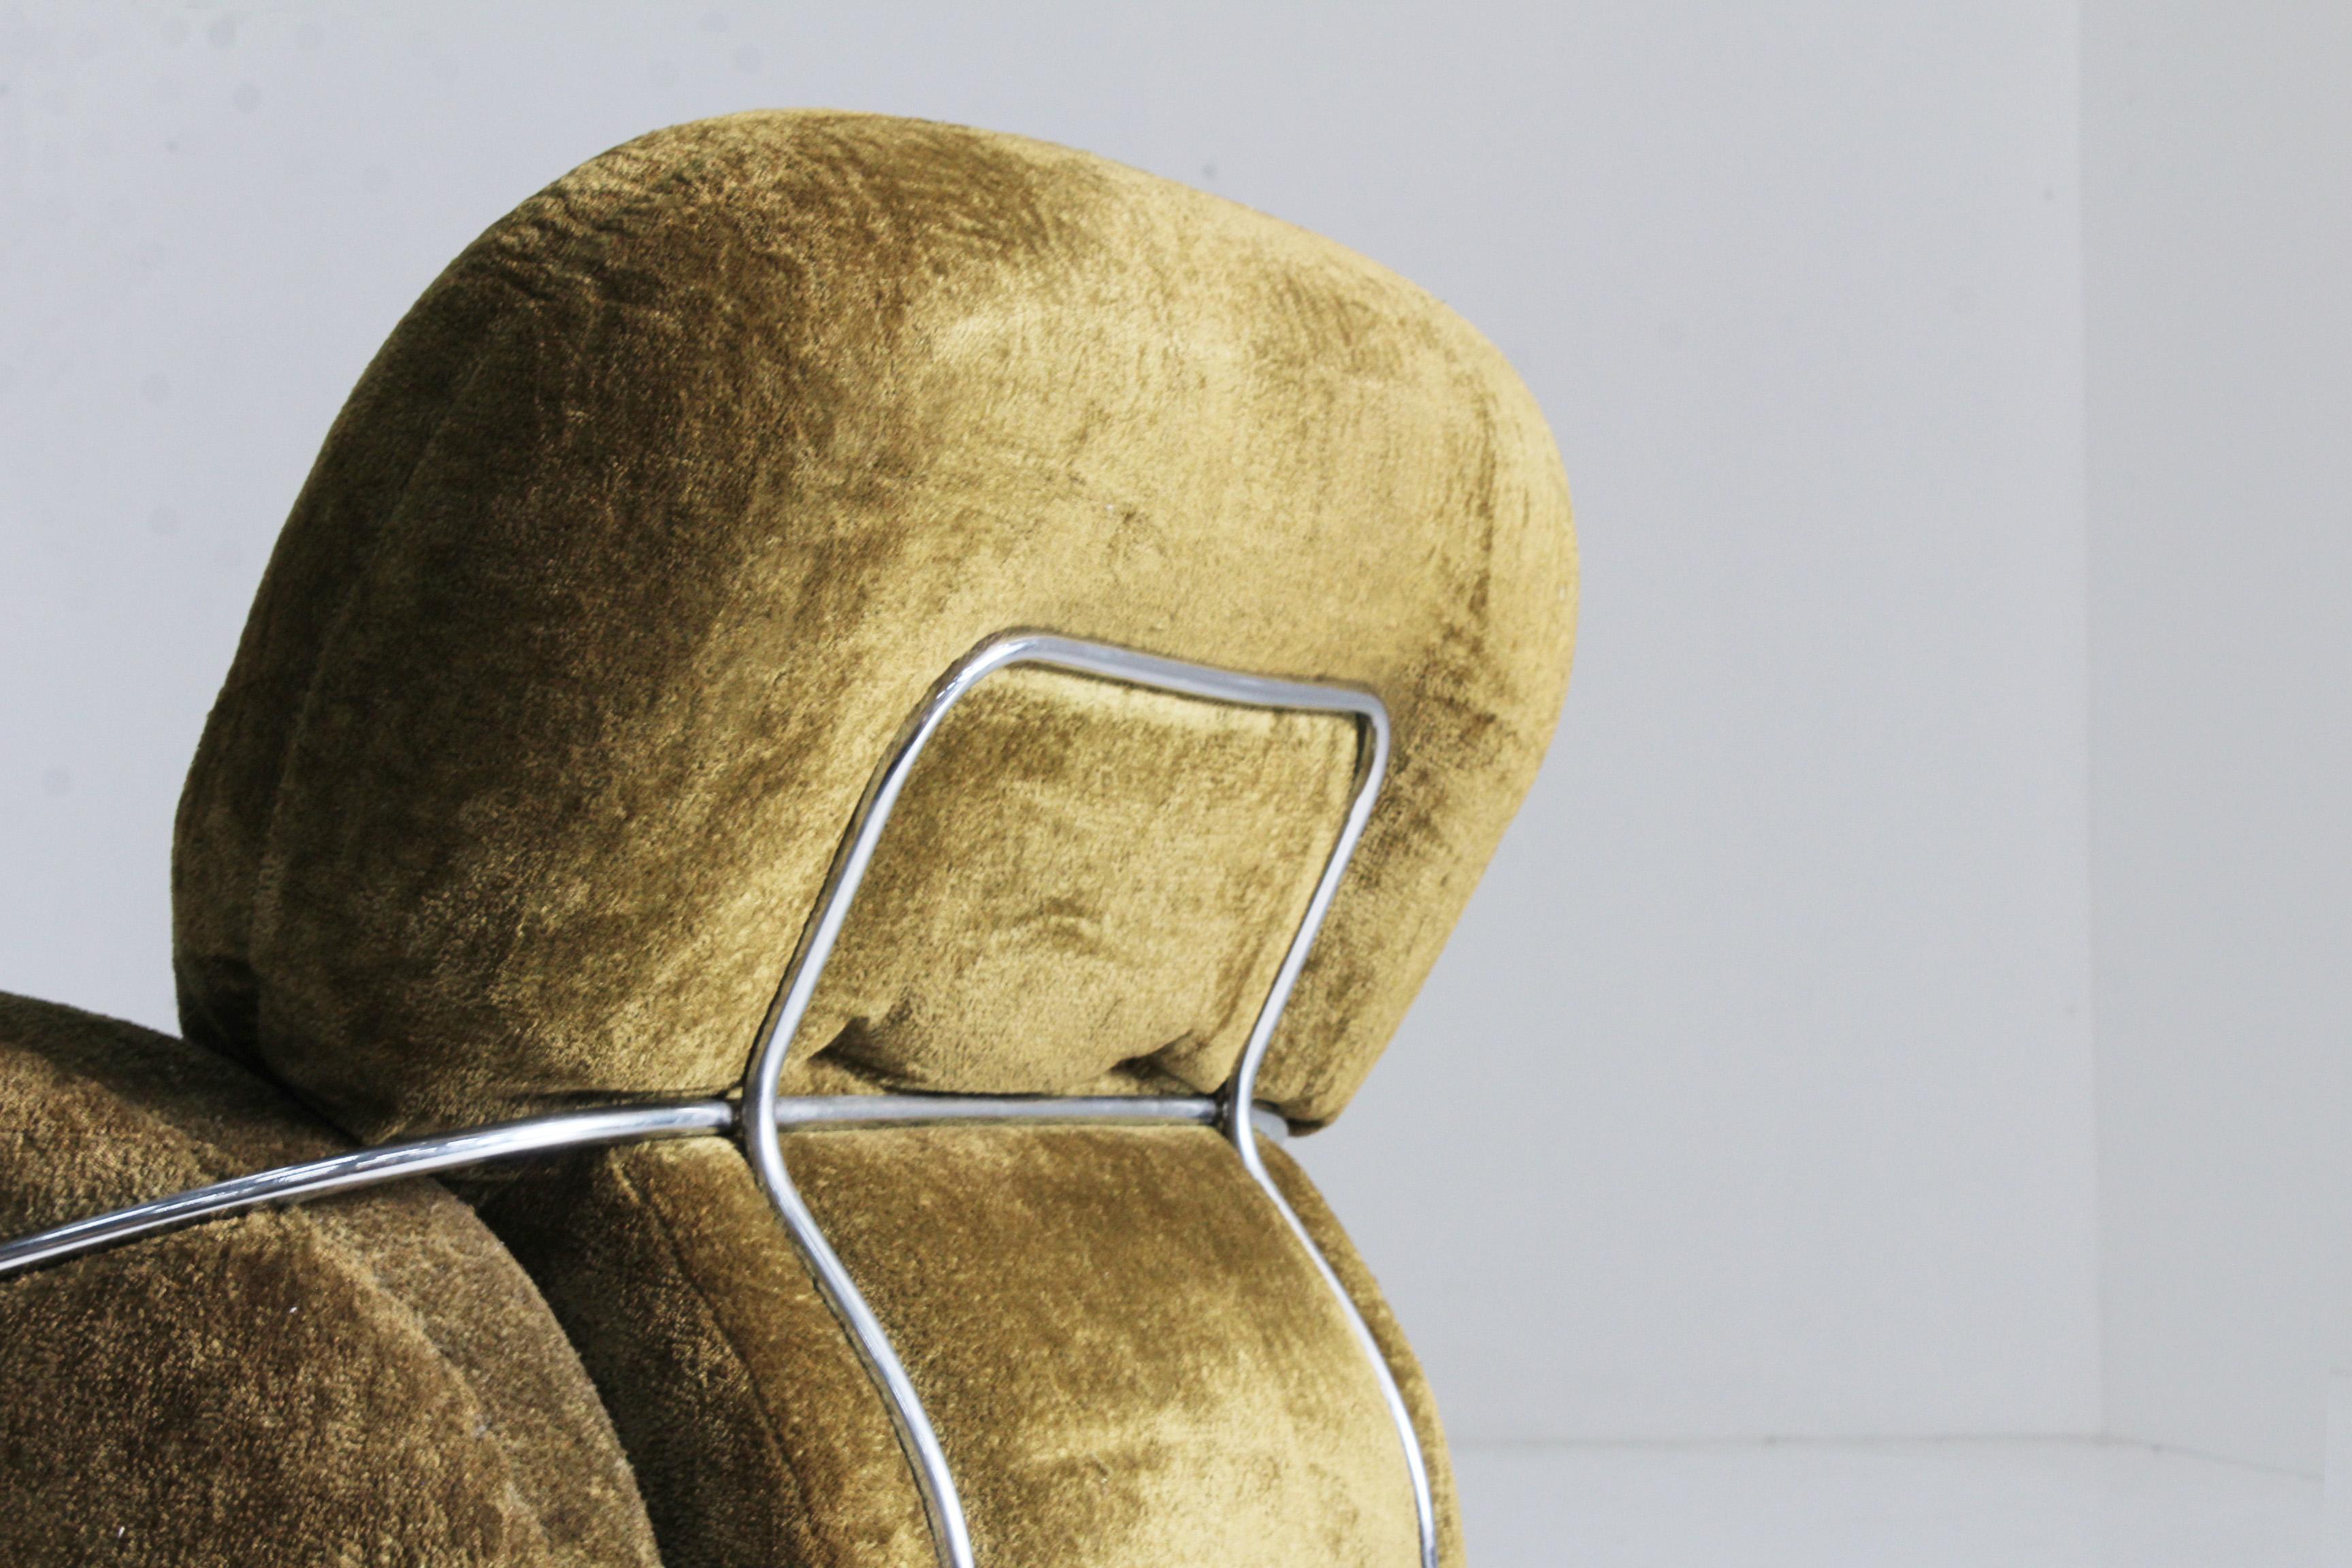 Green velvet Okay armchair designed by Italian designer Adriano Piazzesi in the 1970s. This comfy chair is in a good condition with minor traces of use. This chair has a green velvet fabric with a chromed metal structure.